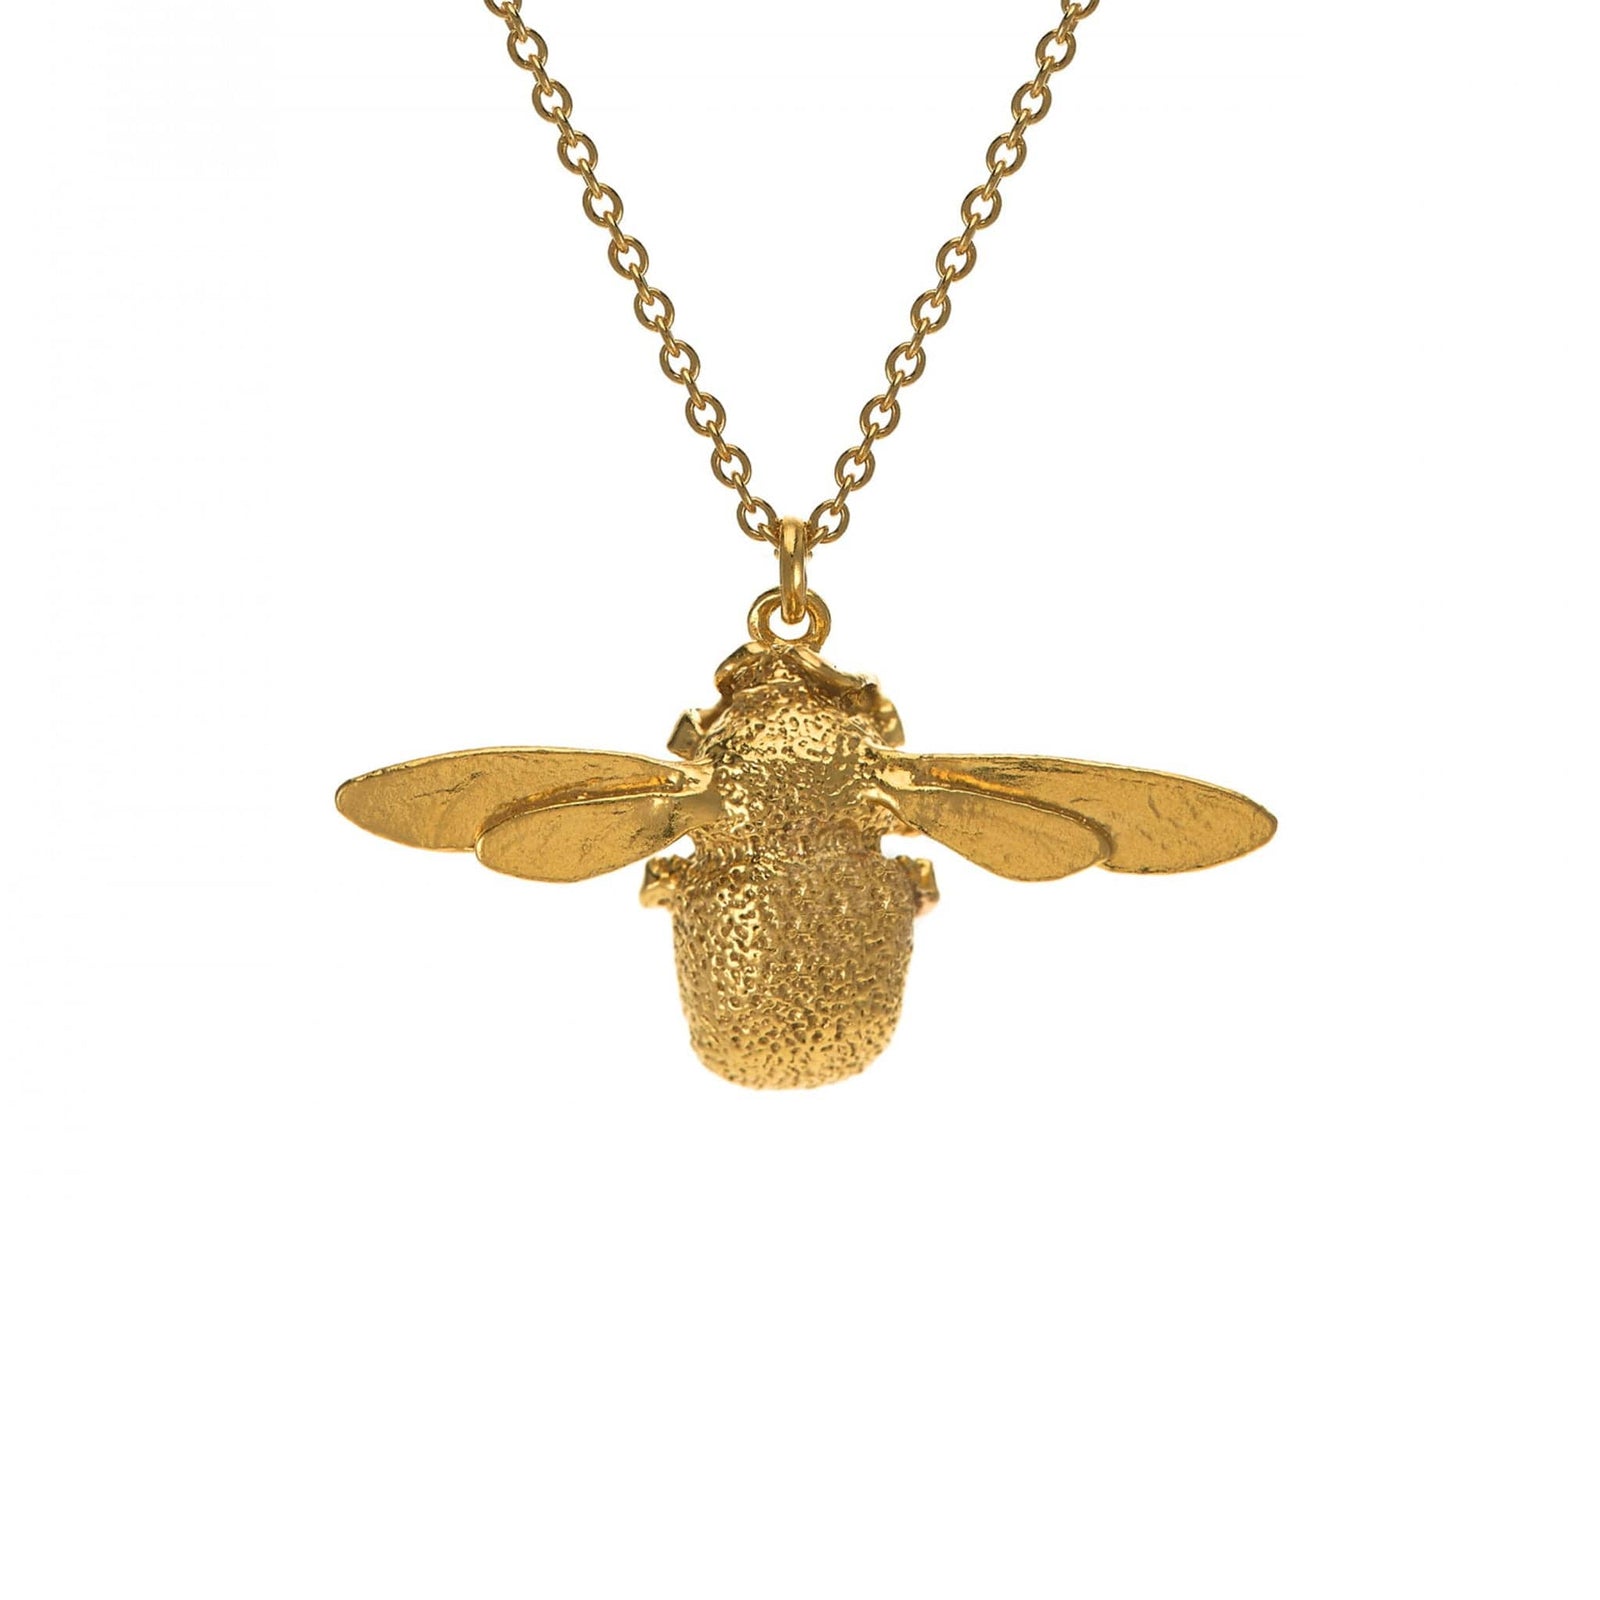 Alex Monroe Bumblebee Necklace in Gold